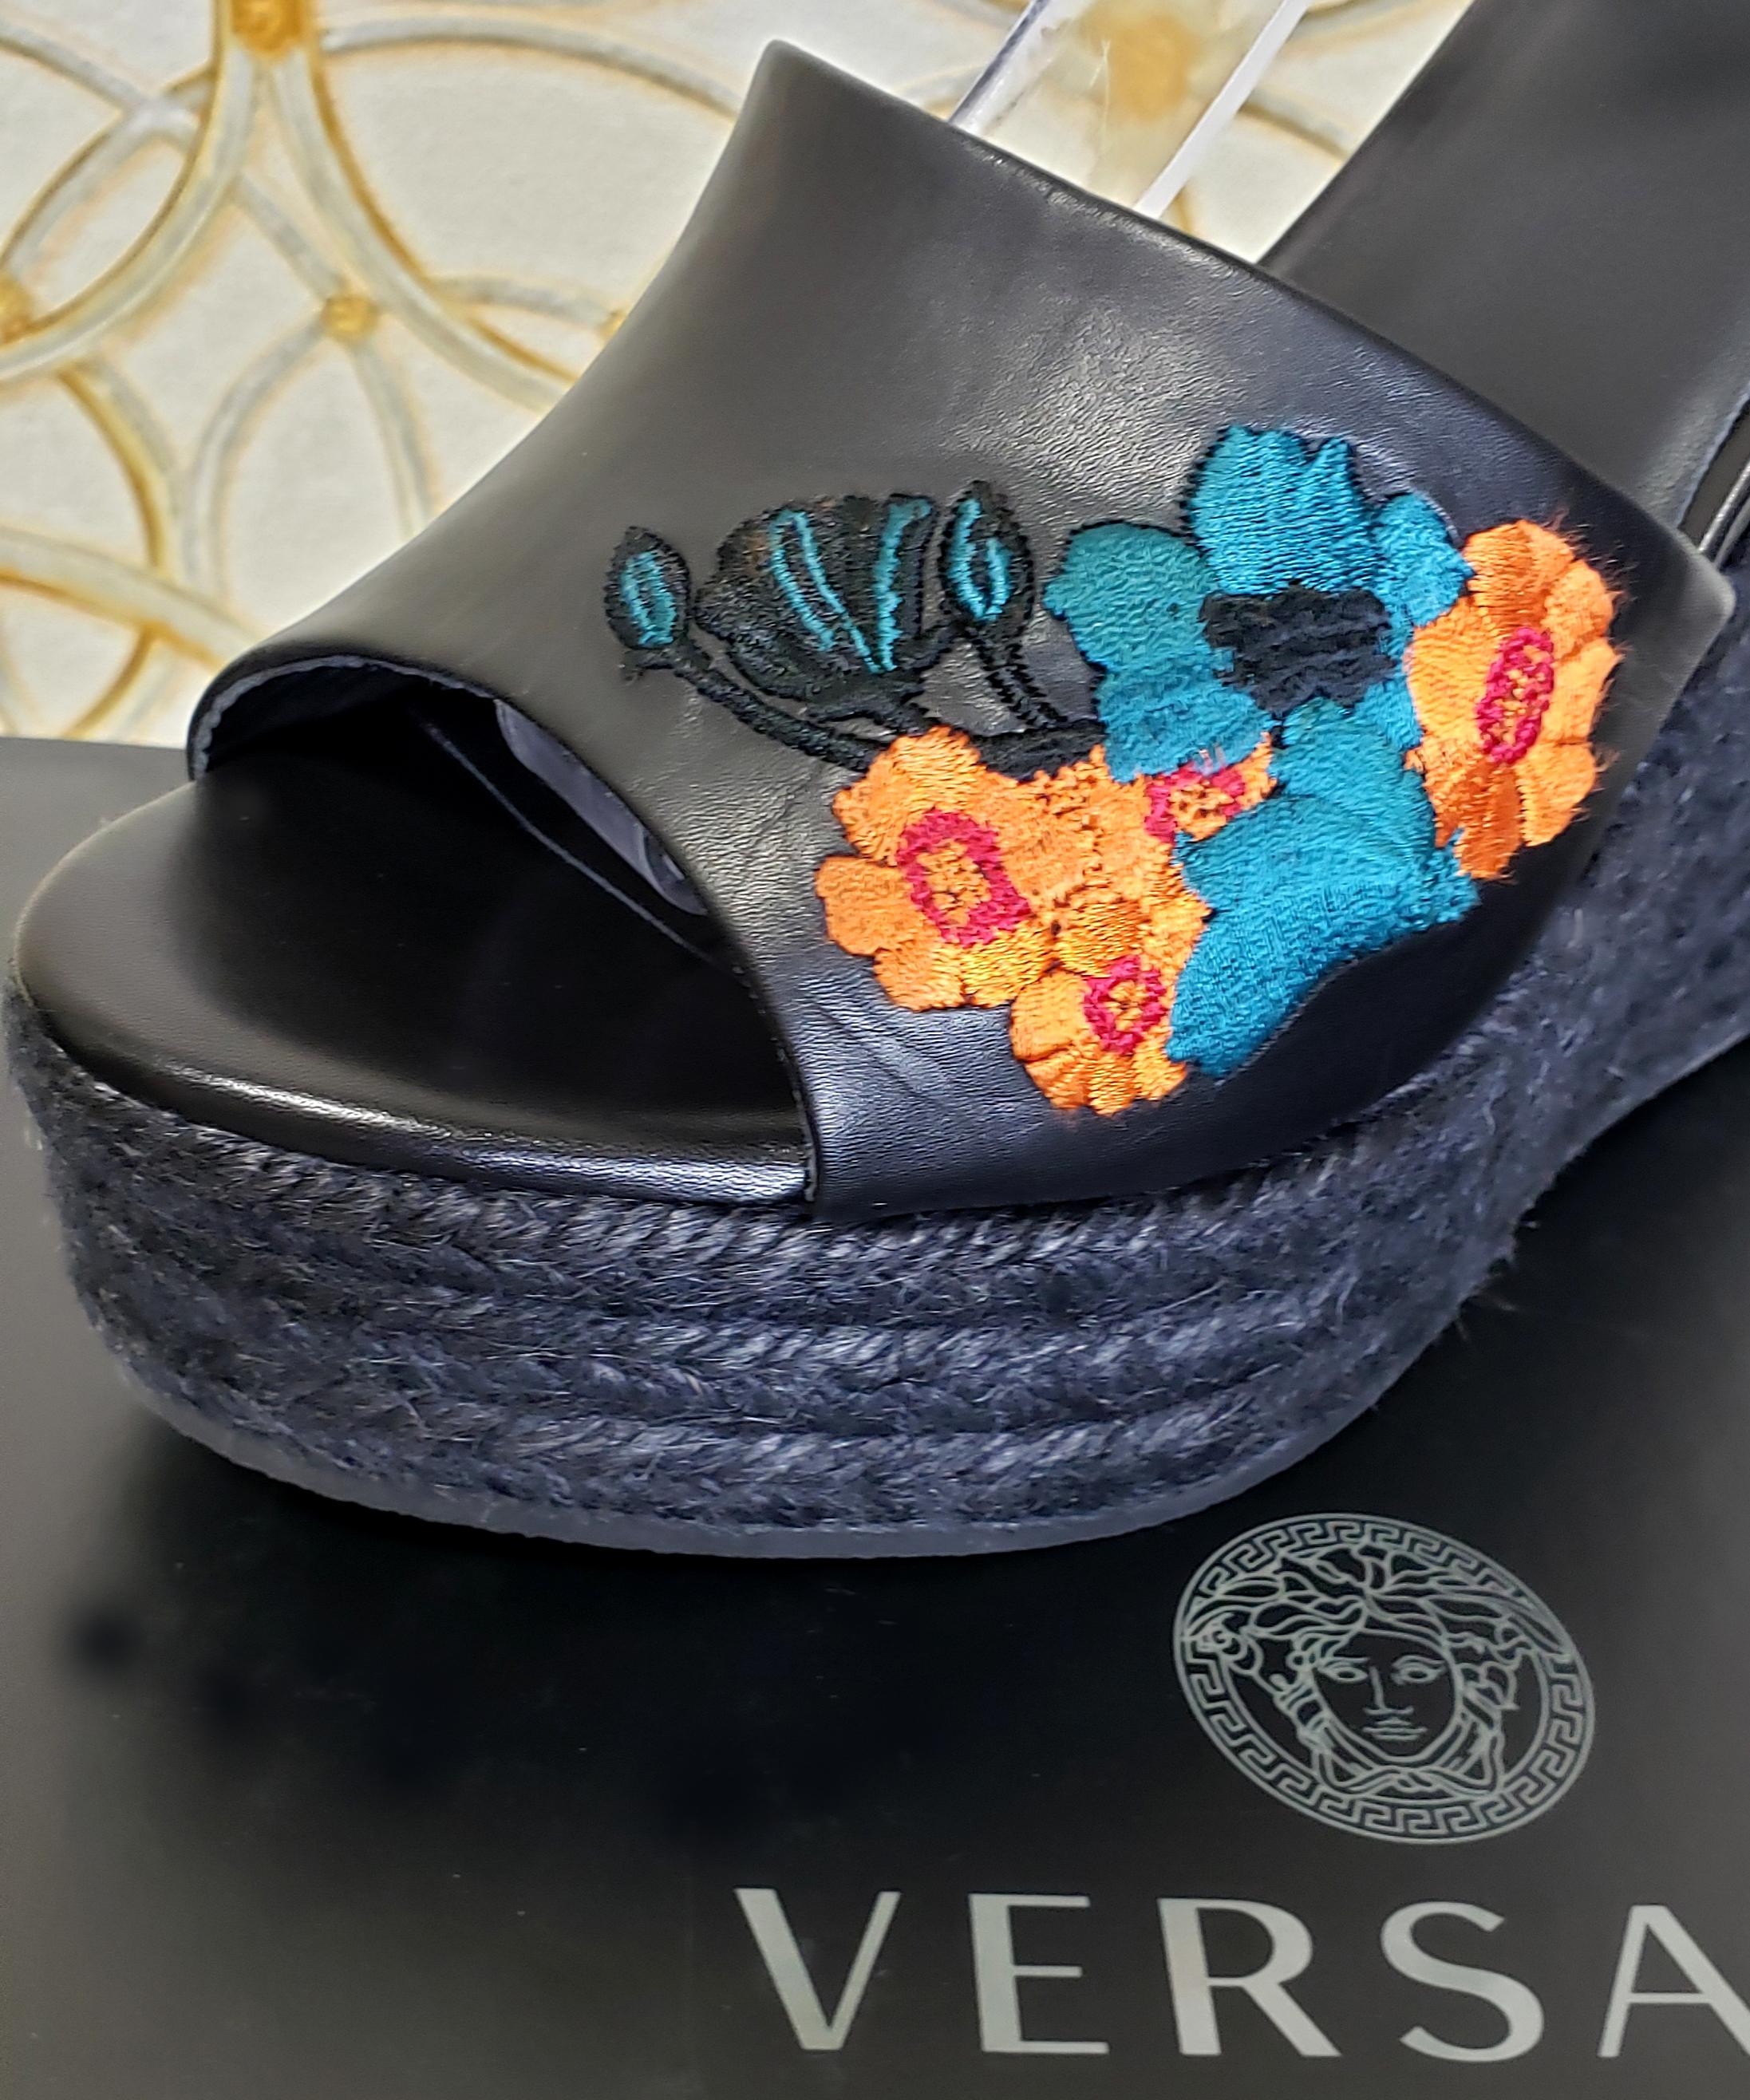 VERSACE BLACK LEATHER and FLORAL EMBROIDERED WEDGE SANDALS 38.5, 39 In New Condition For Sale In Montgomery, TX